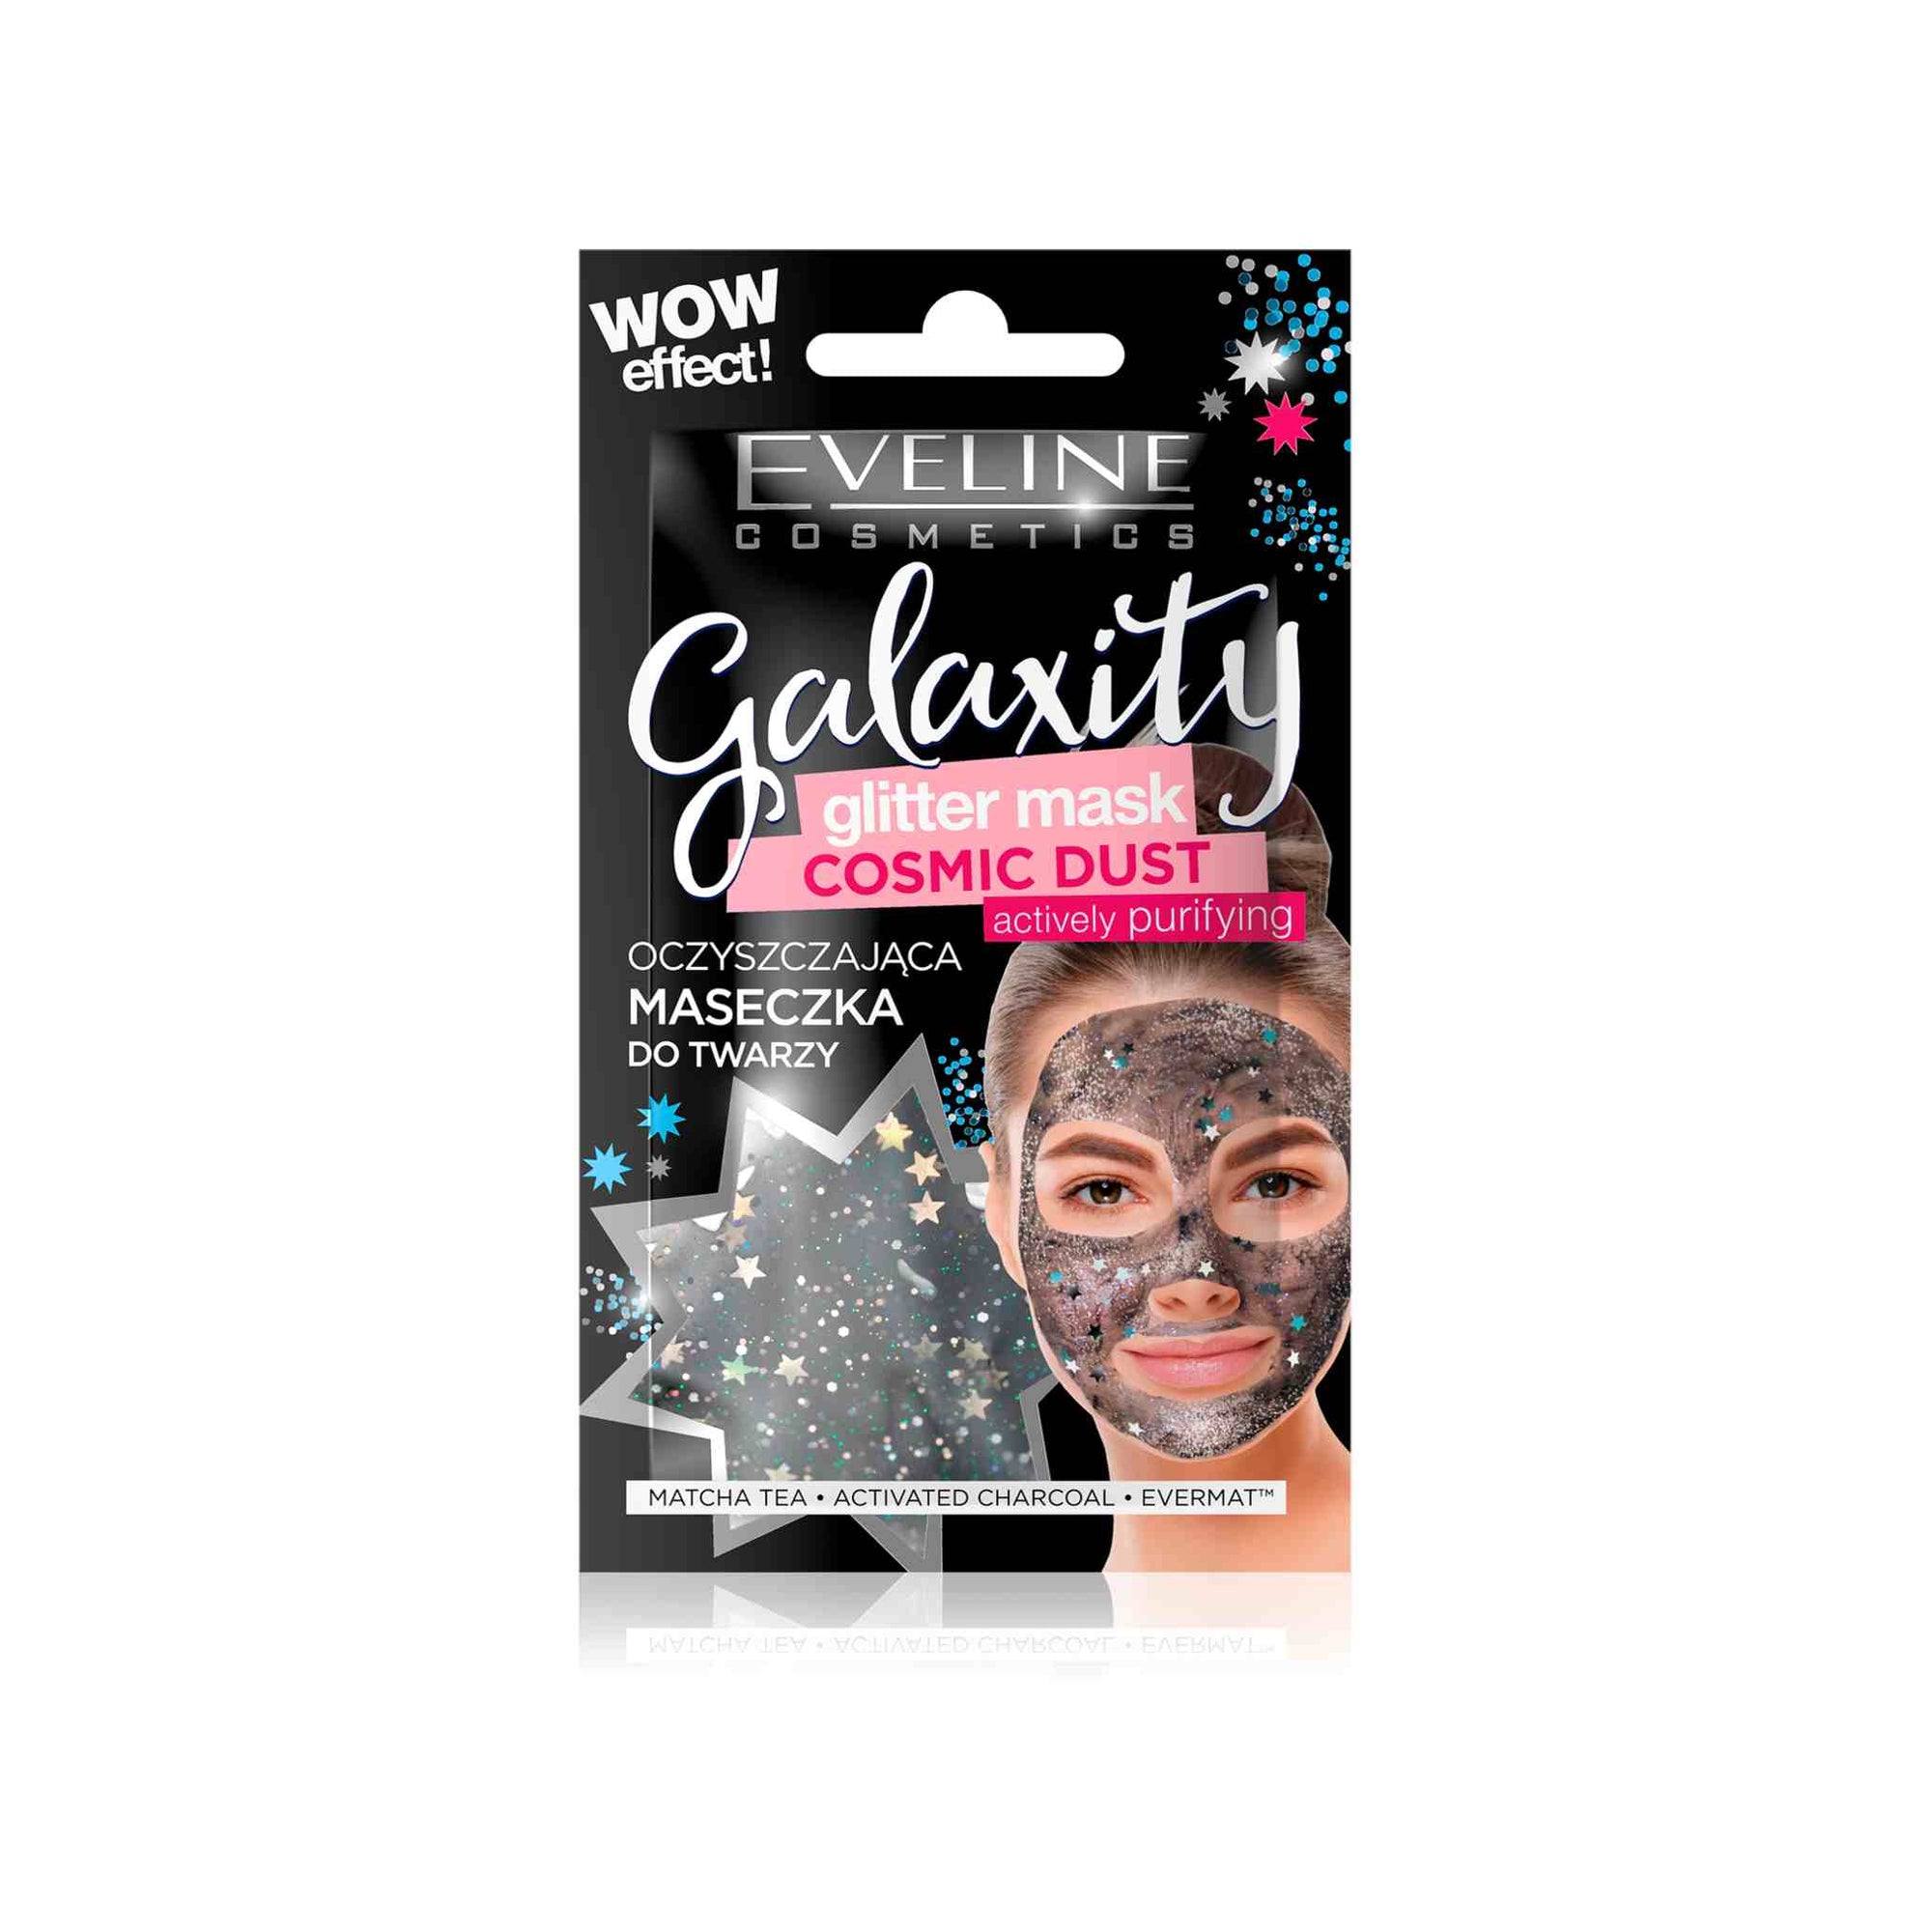 Actively Purifying Glitter Mask Cosmic Dust